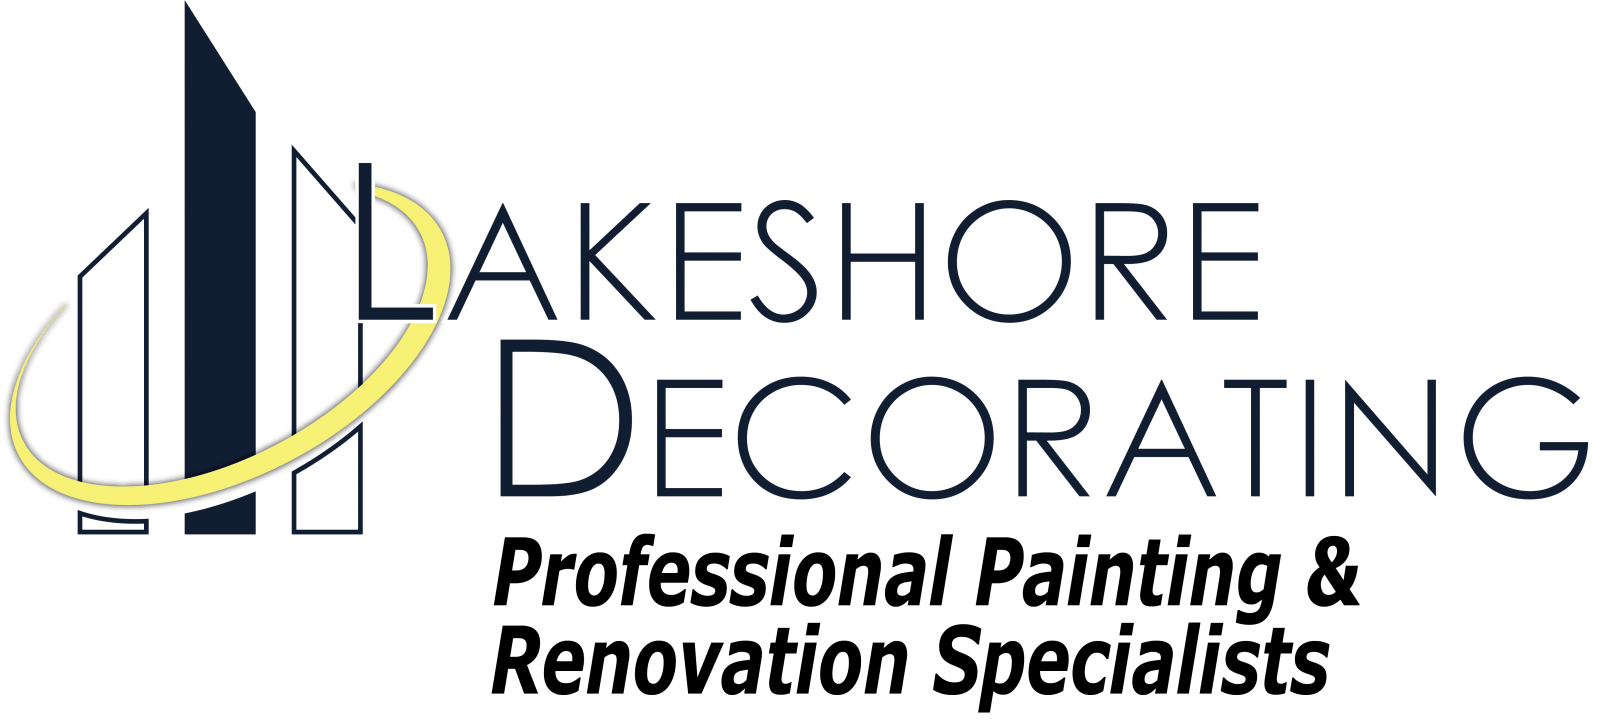 Commercial Interior Painter